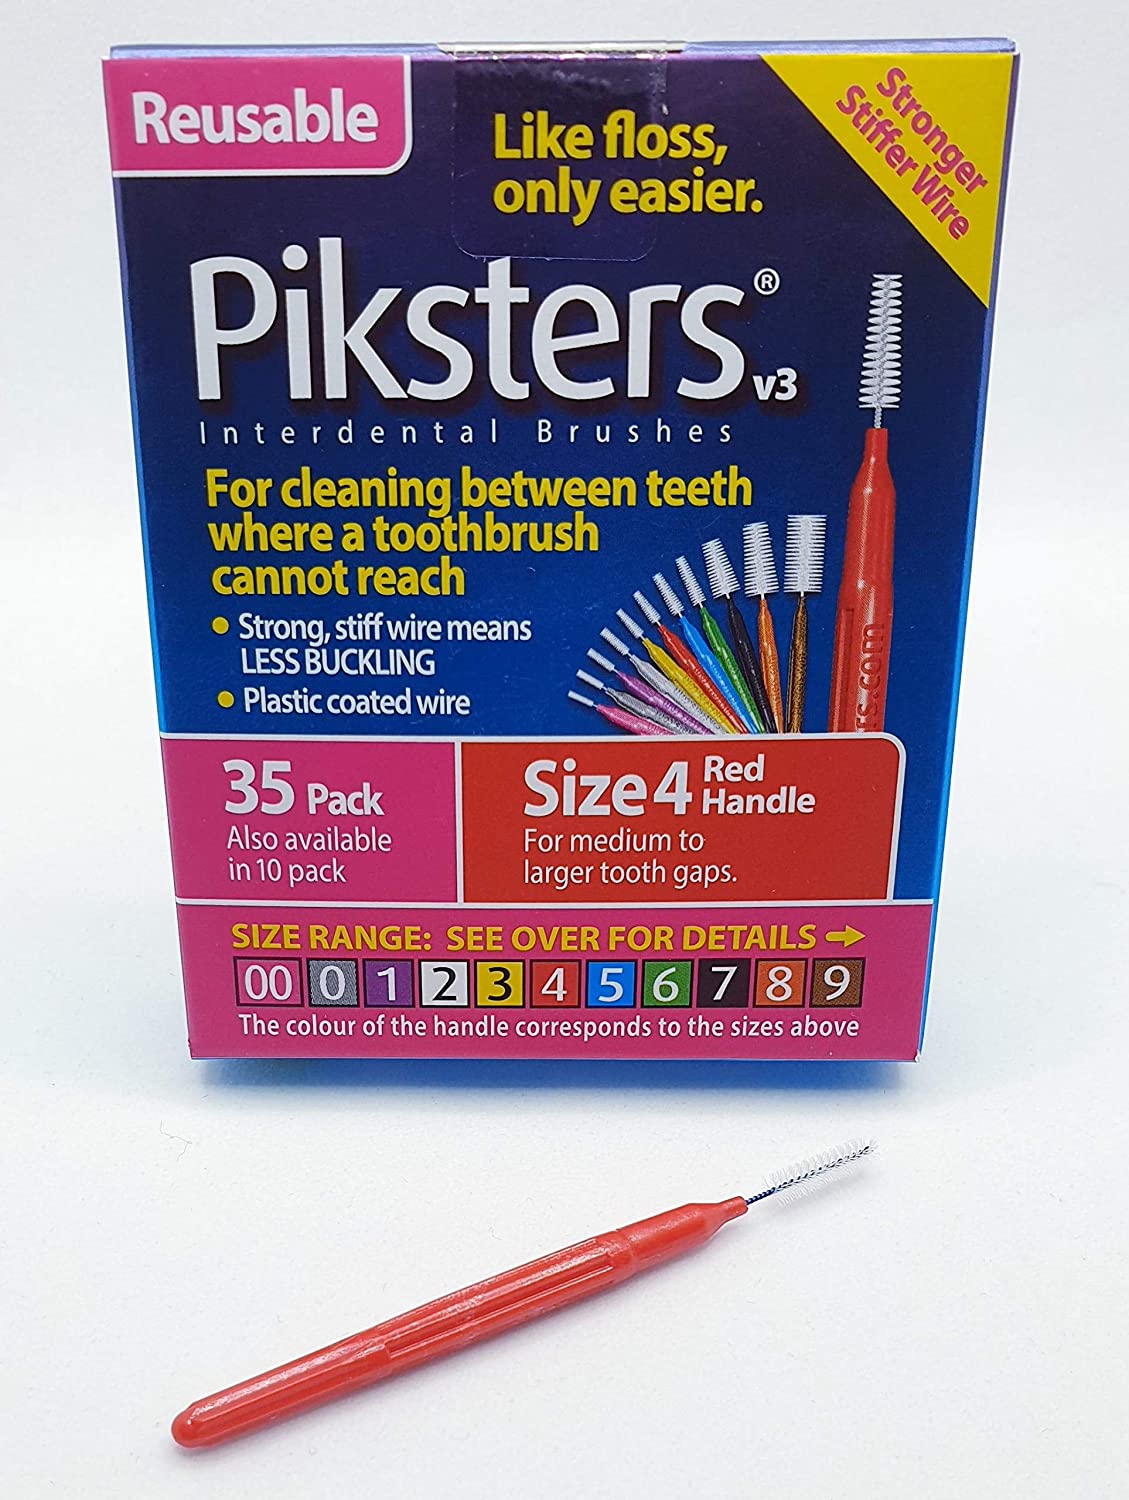 Piksters Interdental Brush 35Pk Sizes 00 to 6